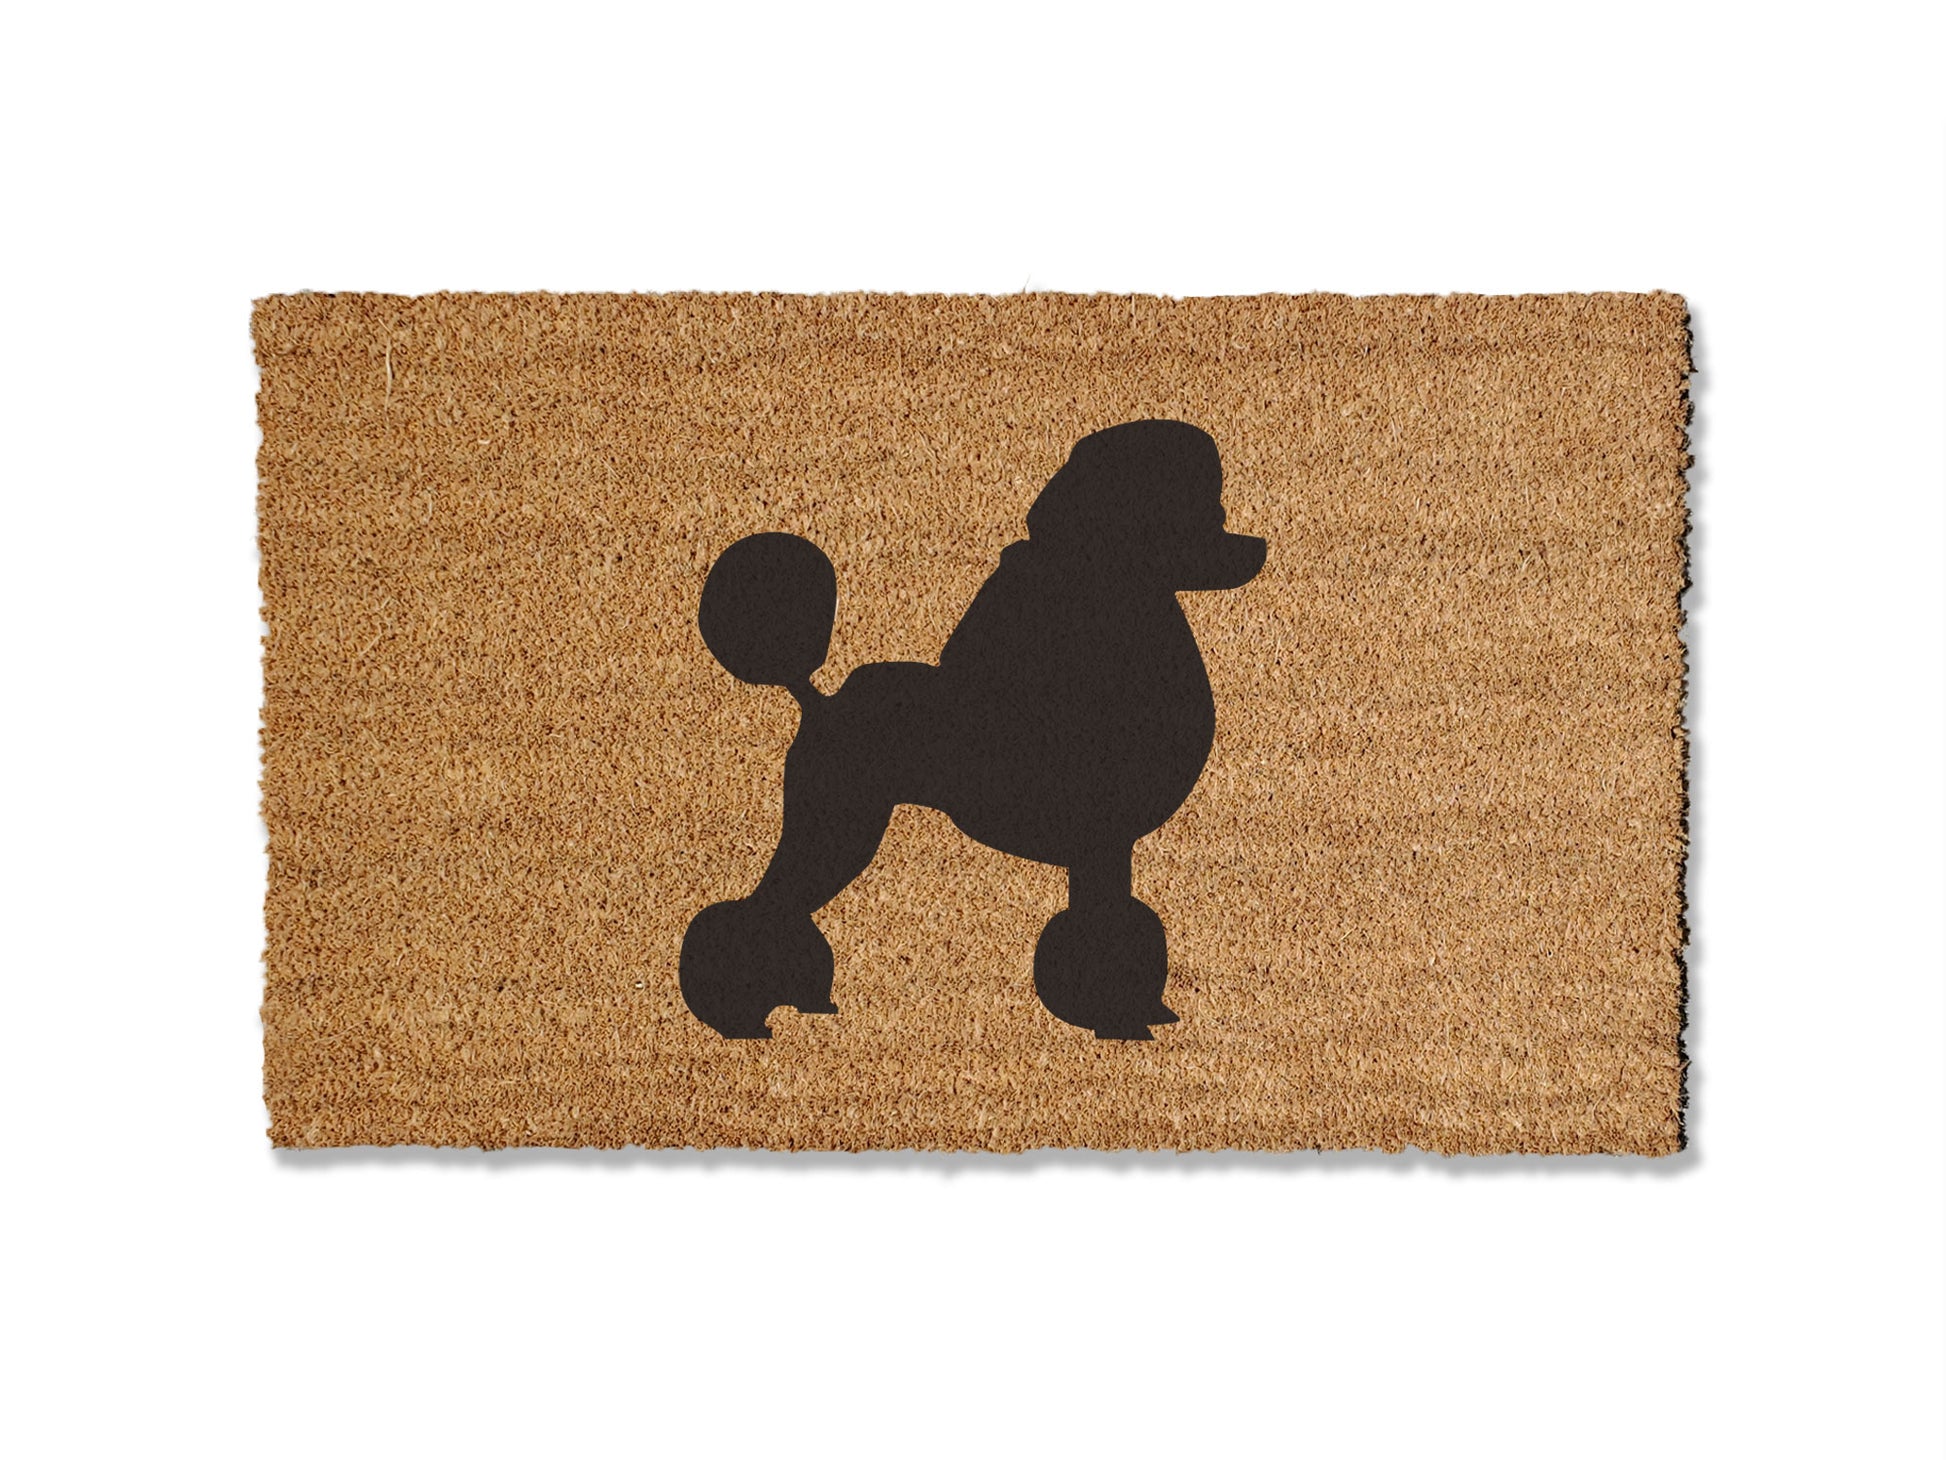 Coir doormat featuring an adorable Poodle design, ideal for dog lovers. This doormat is not only charming but also effective at trapping dirt. Available in multiple sizes to suit your entryway needs.